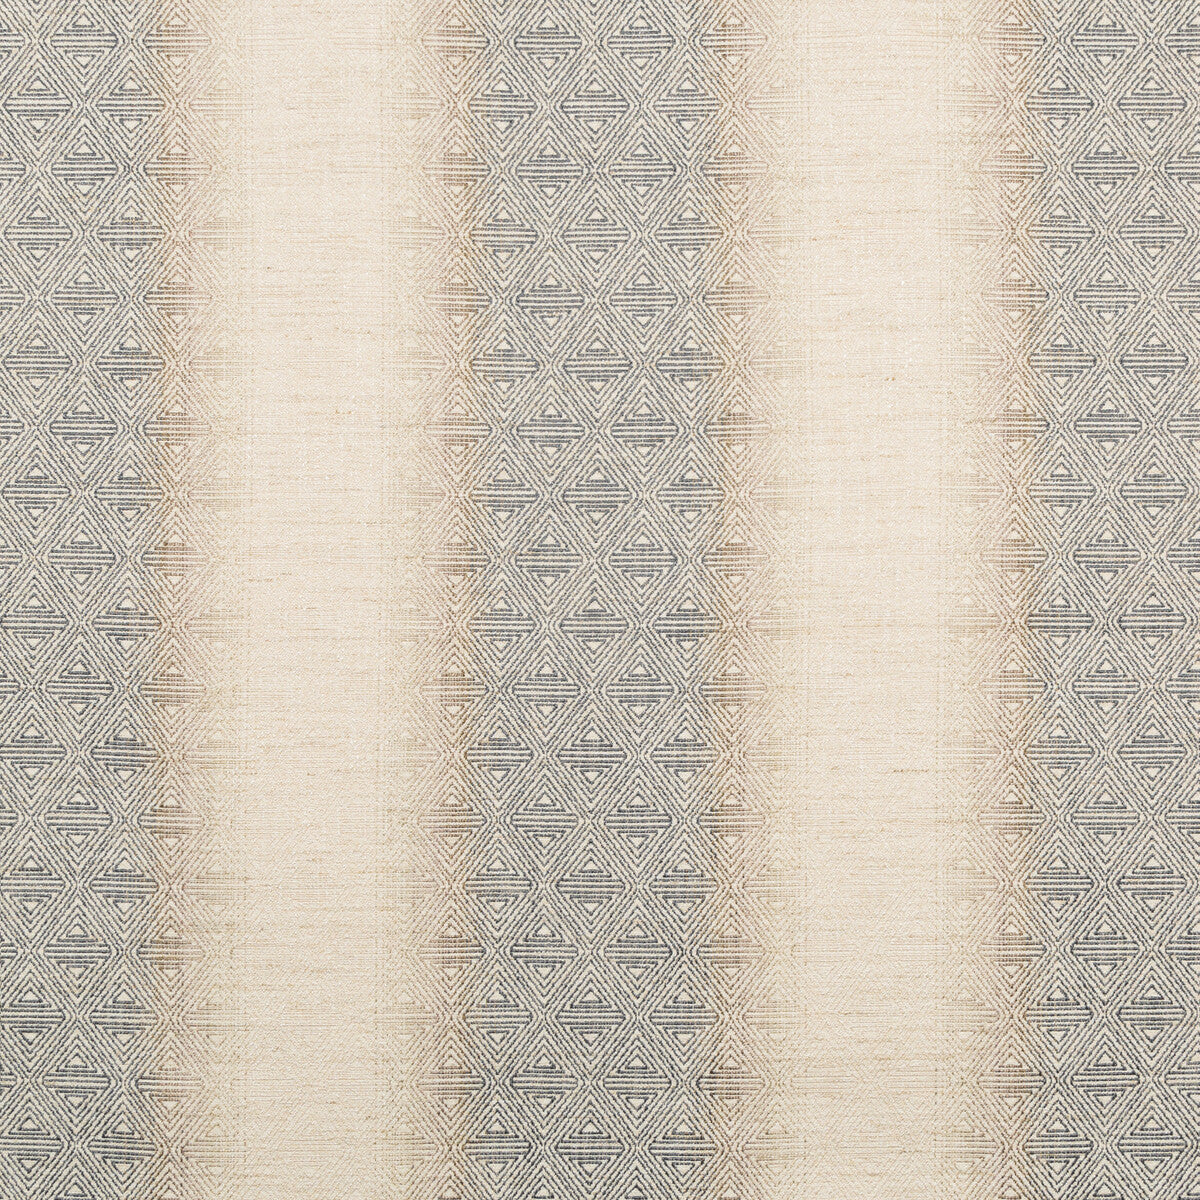 Tulum fabric in pewter color - pattern 35556.11.0 - by Kravet Couture in the Modern Colors-Sojourn Collection collection